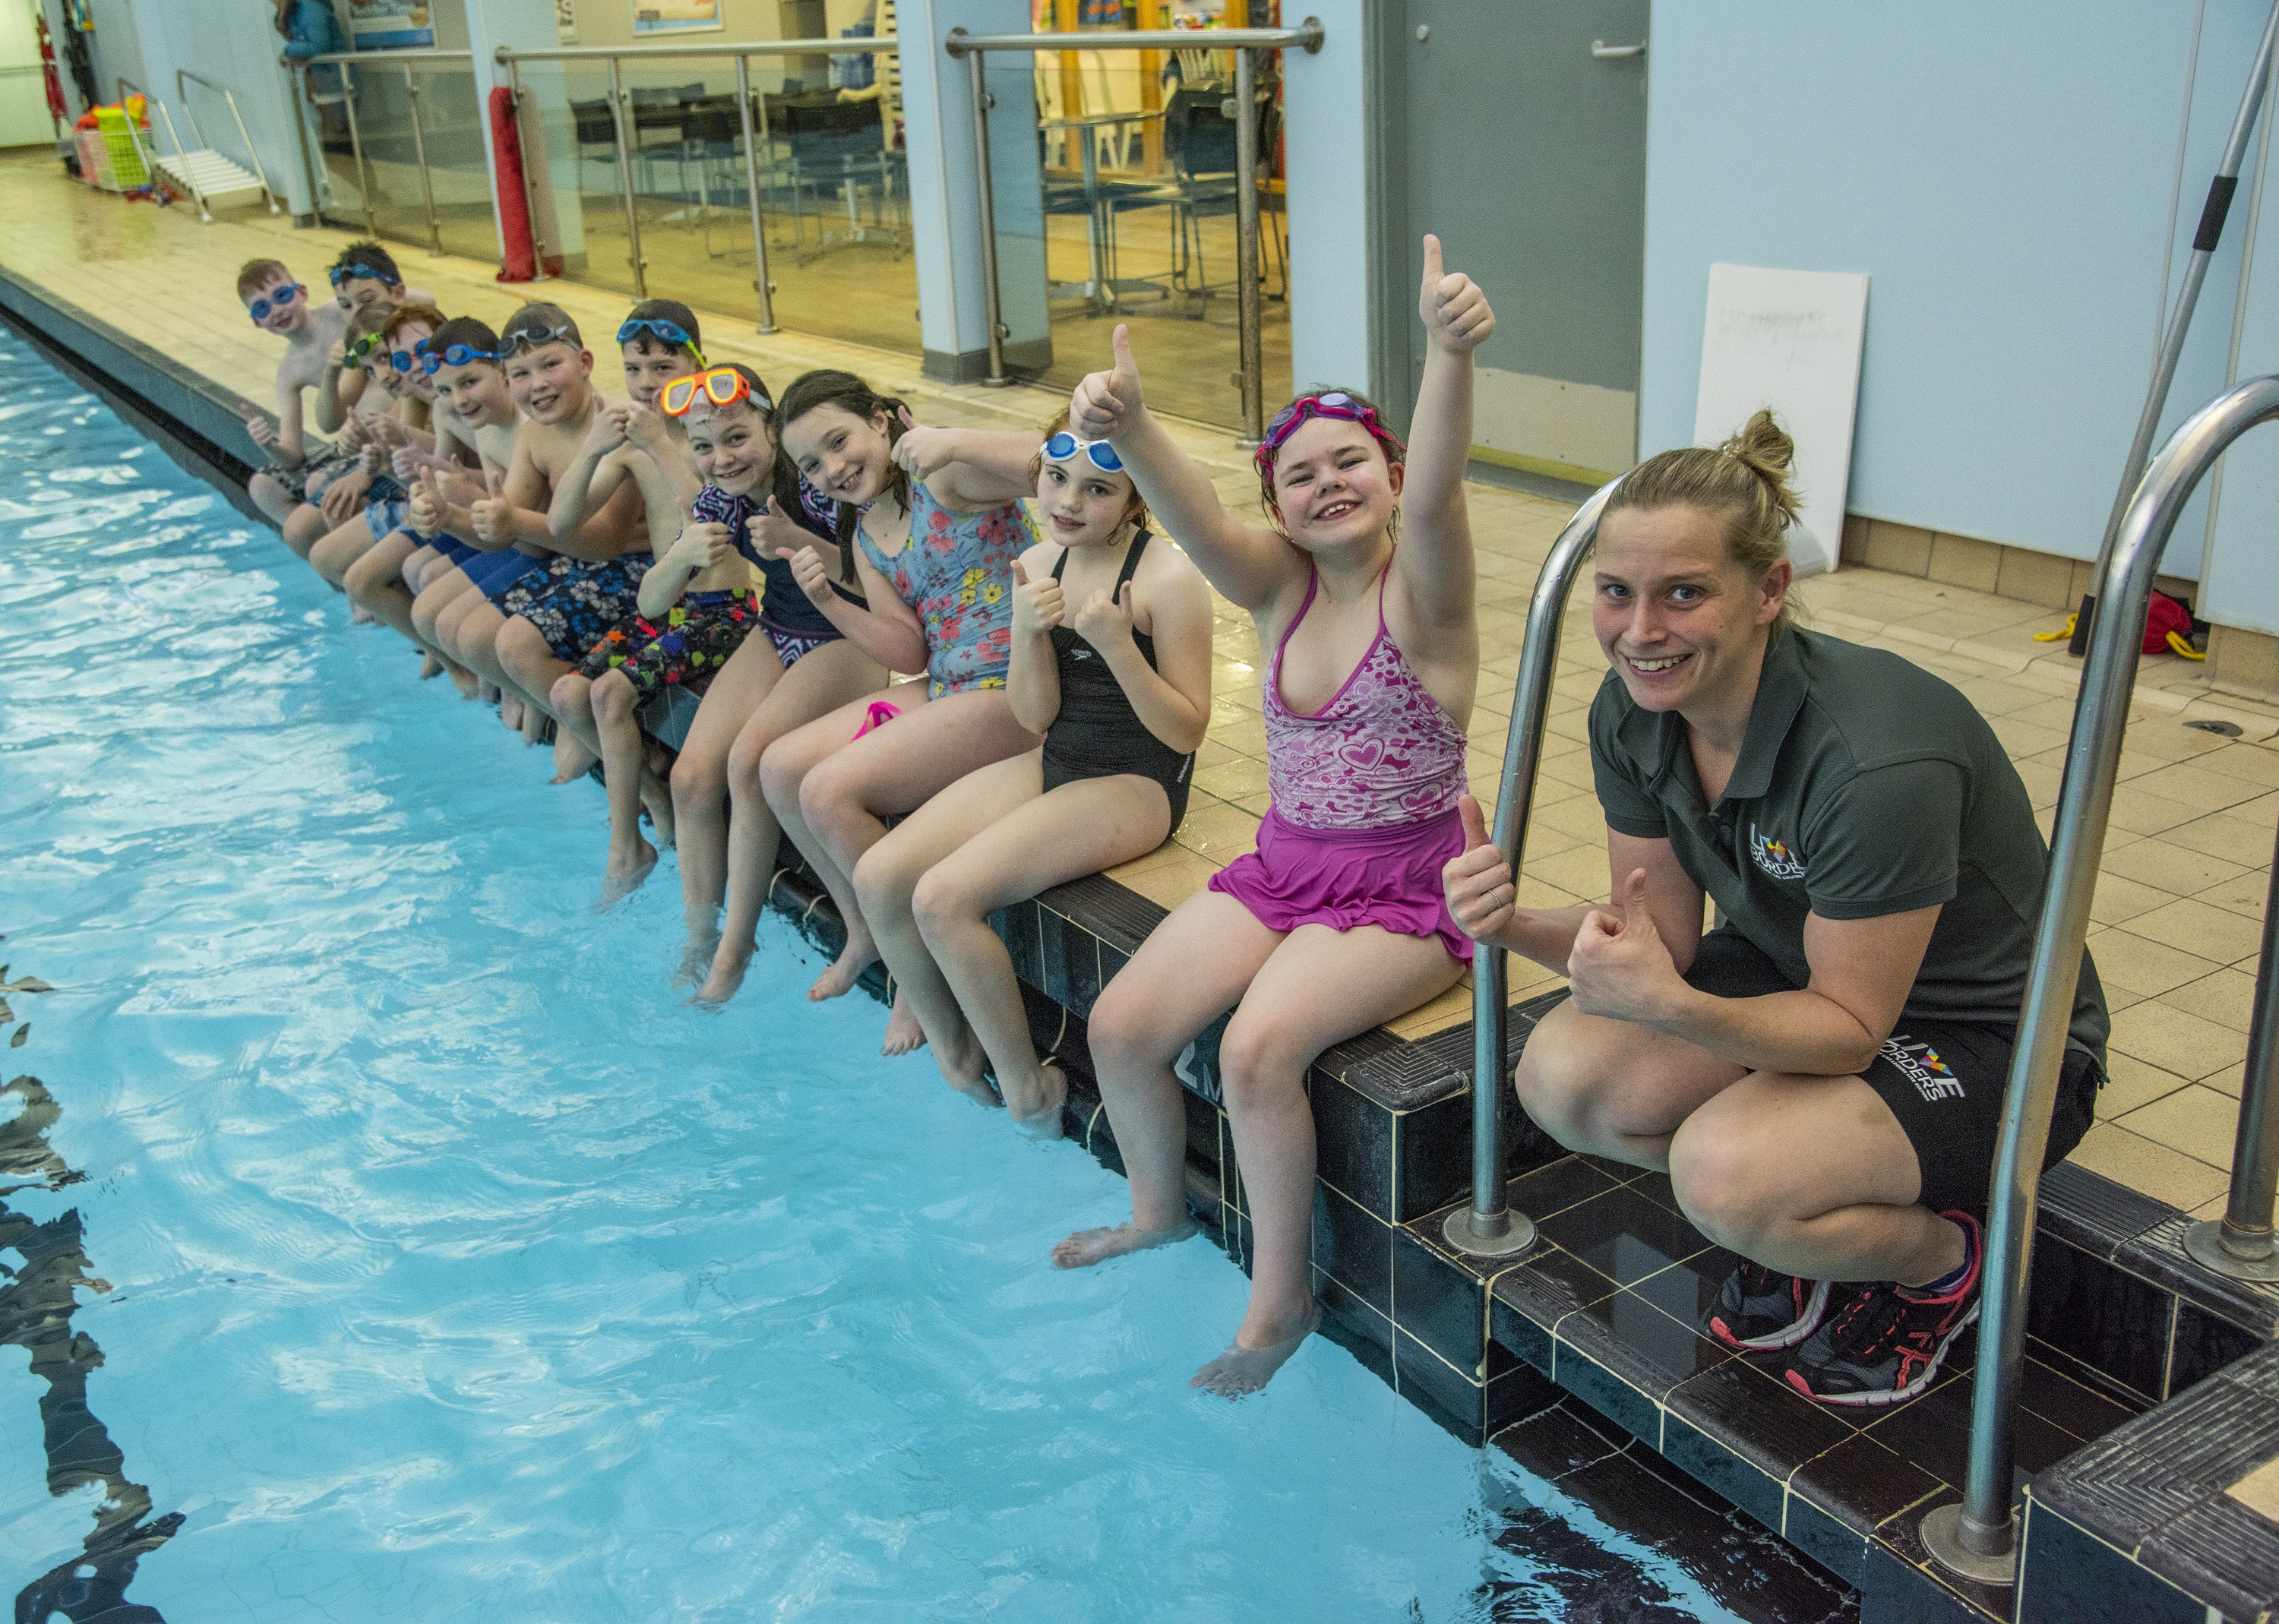 New Learn 2 Swim programme launches - Latest News